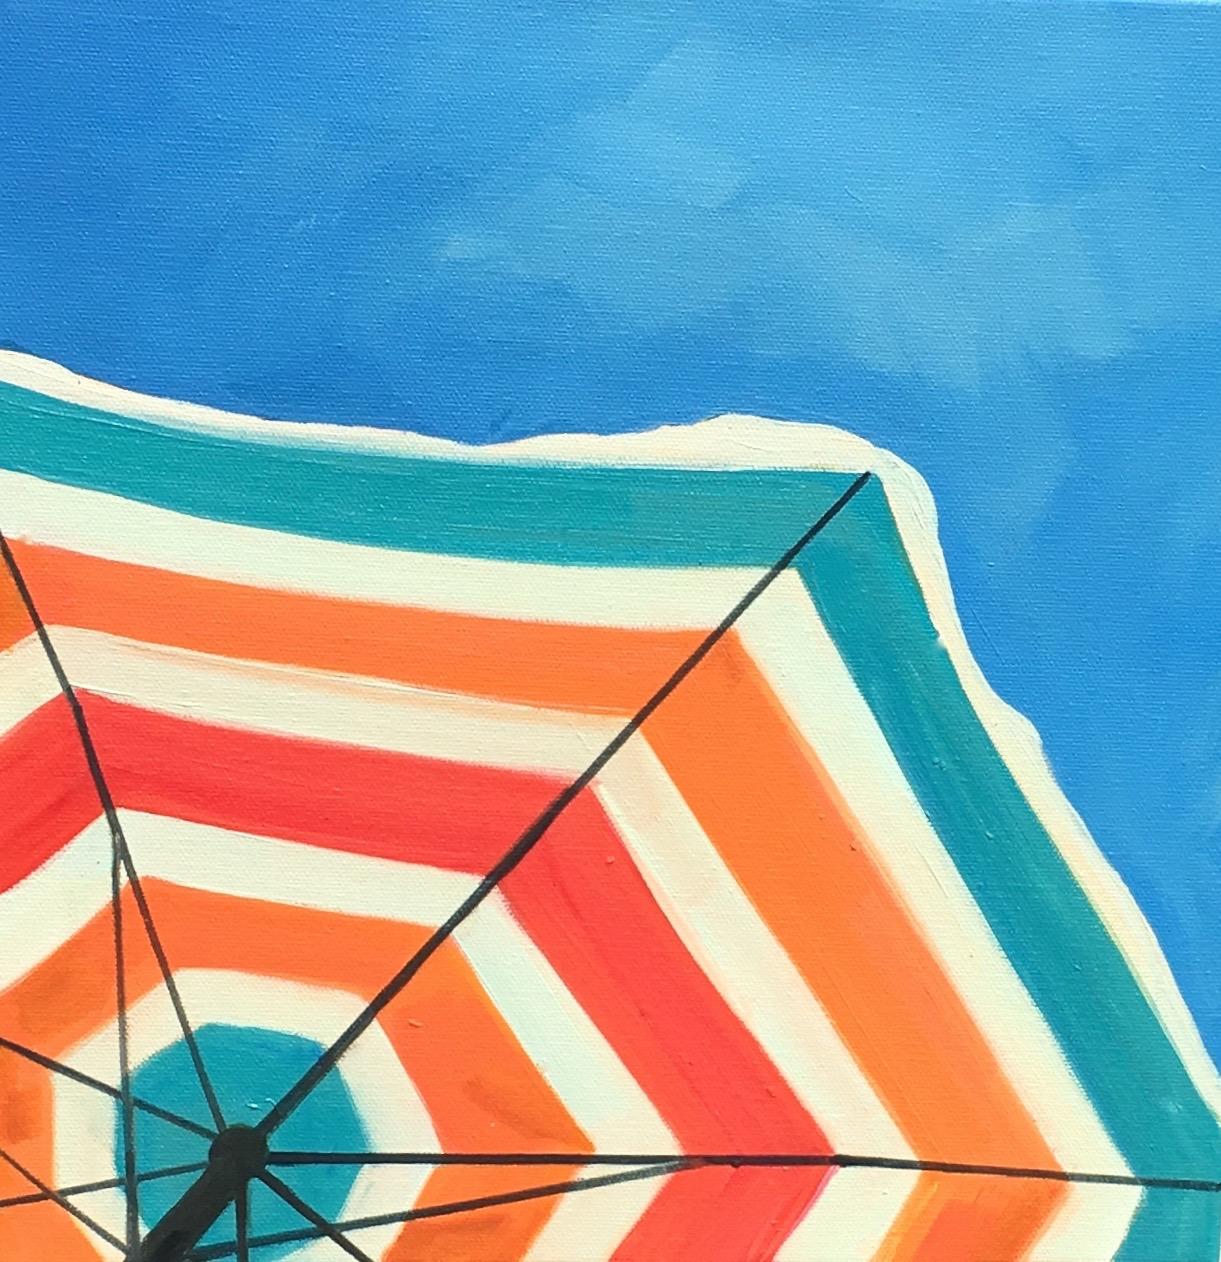 T.S. Harris Landscape Painting - "Bright Umbrella" Painting of a Striped Beach Umbrella in a Cloudless Sunny Sky